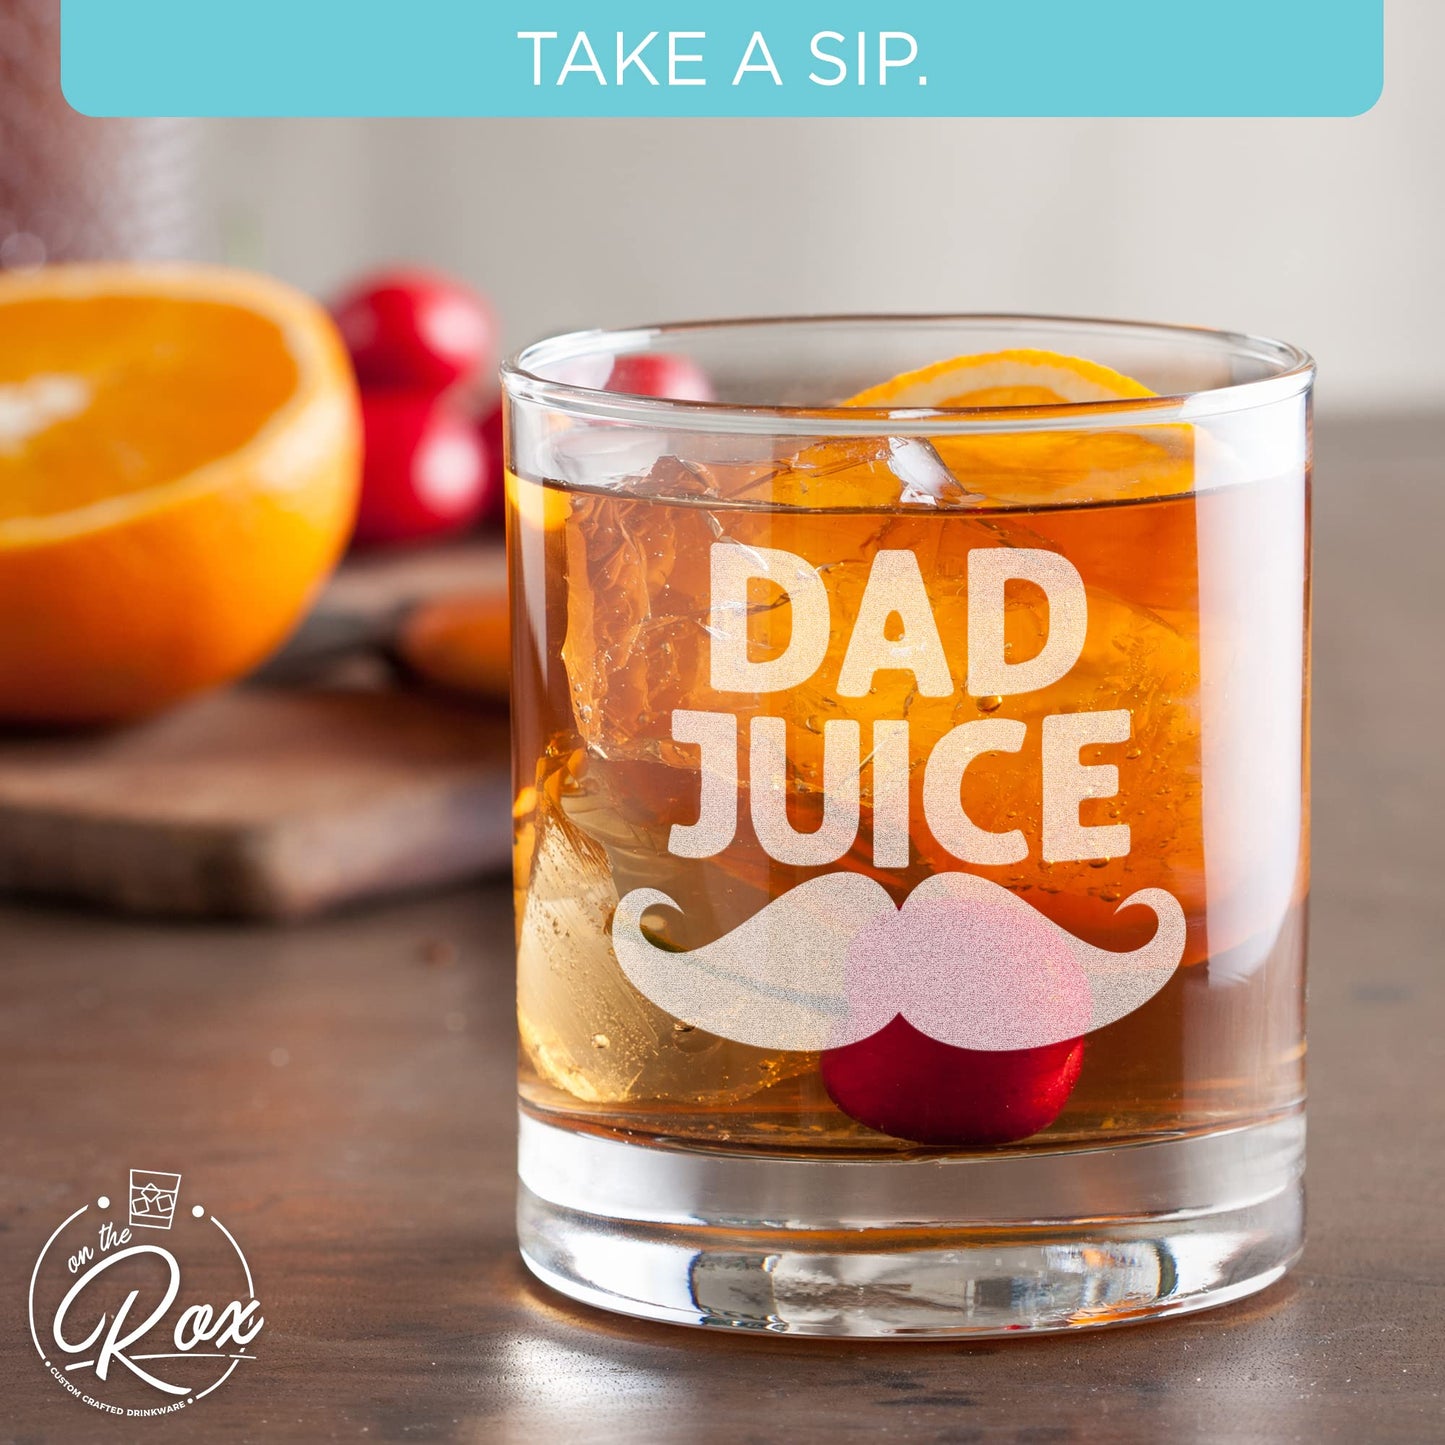 Whiskey Gifts for Dad- 11 Oz "Dad Juice" Engraved Whiskey Glass - Father's Day Gift, Dad Birthday Gifts From Daughter, Wife or Son - Dad Bourbon Glass - Old Fashion Glass - 6 Designs To Choose From